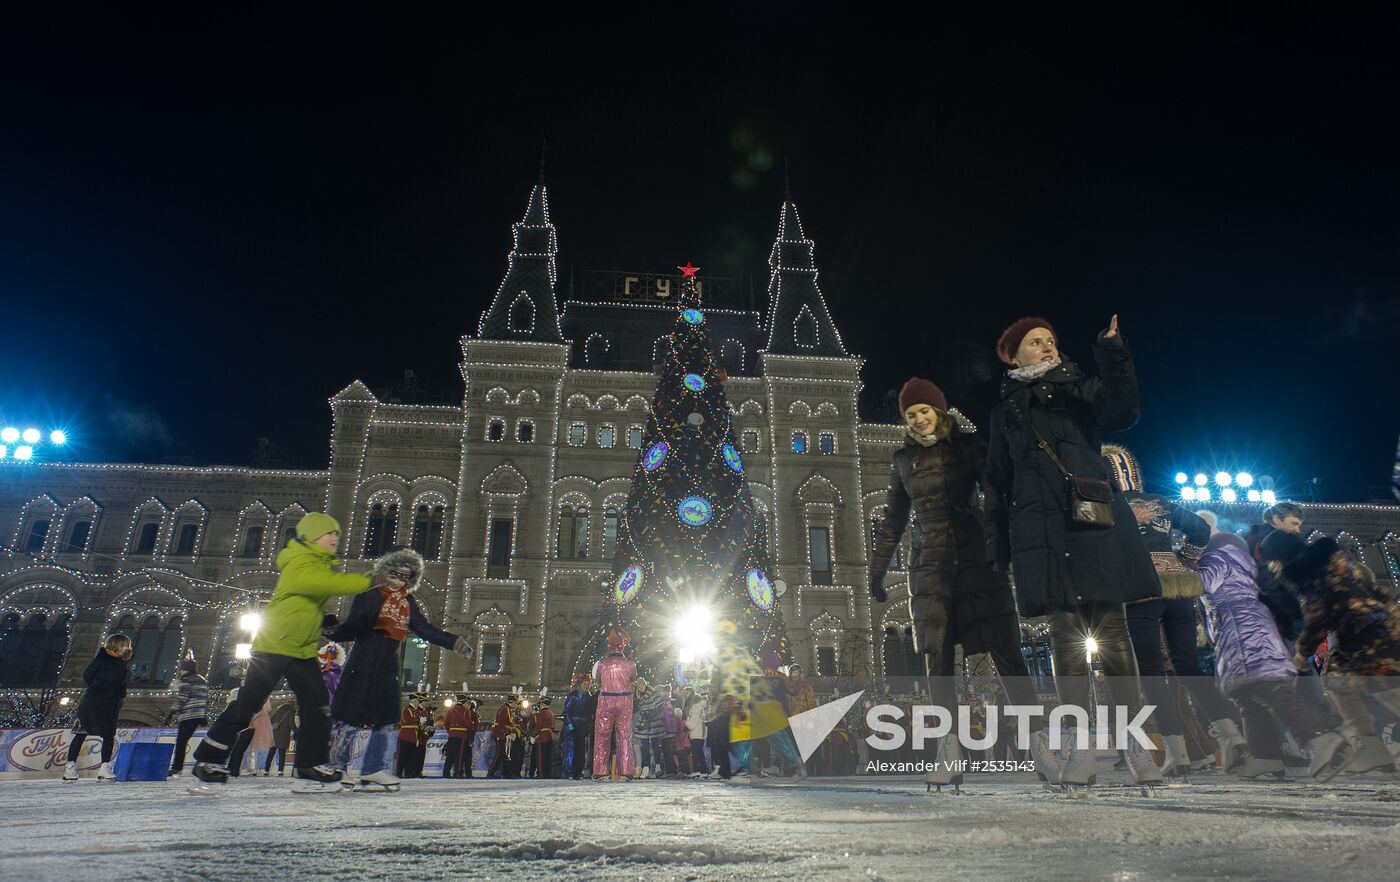 GUM ice skating rink opens on Red Square